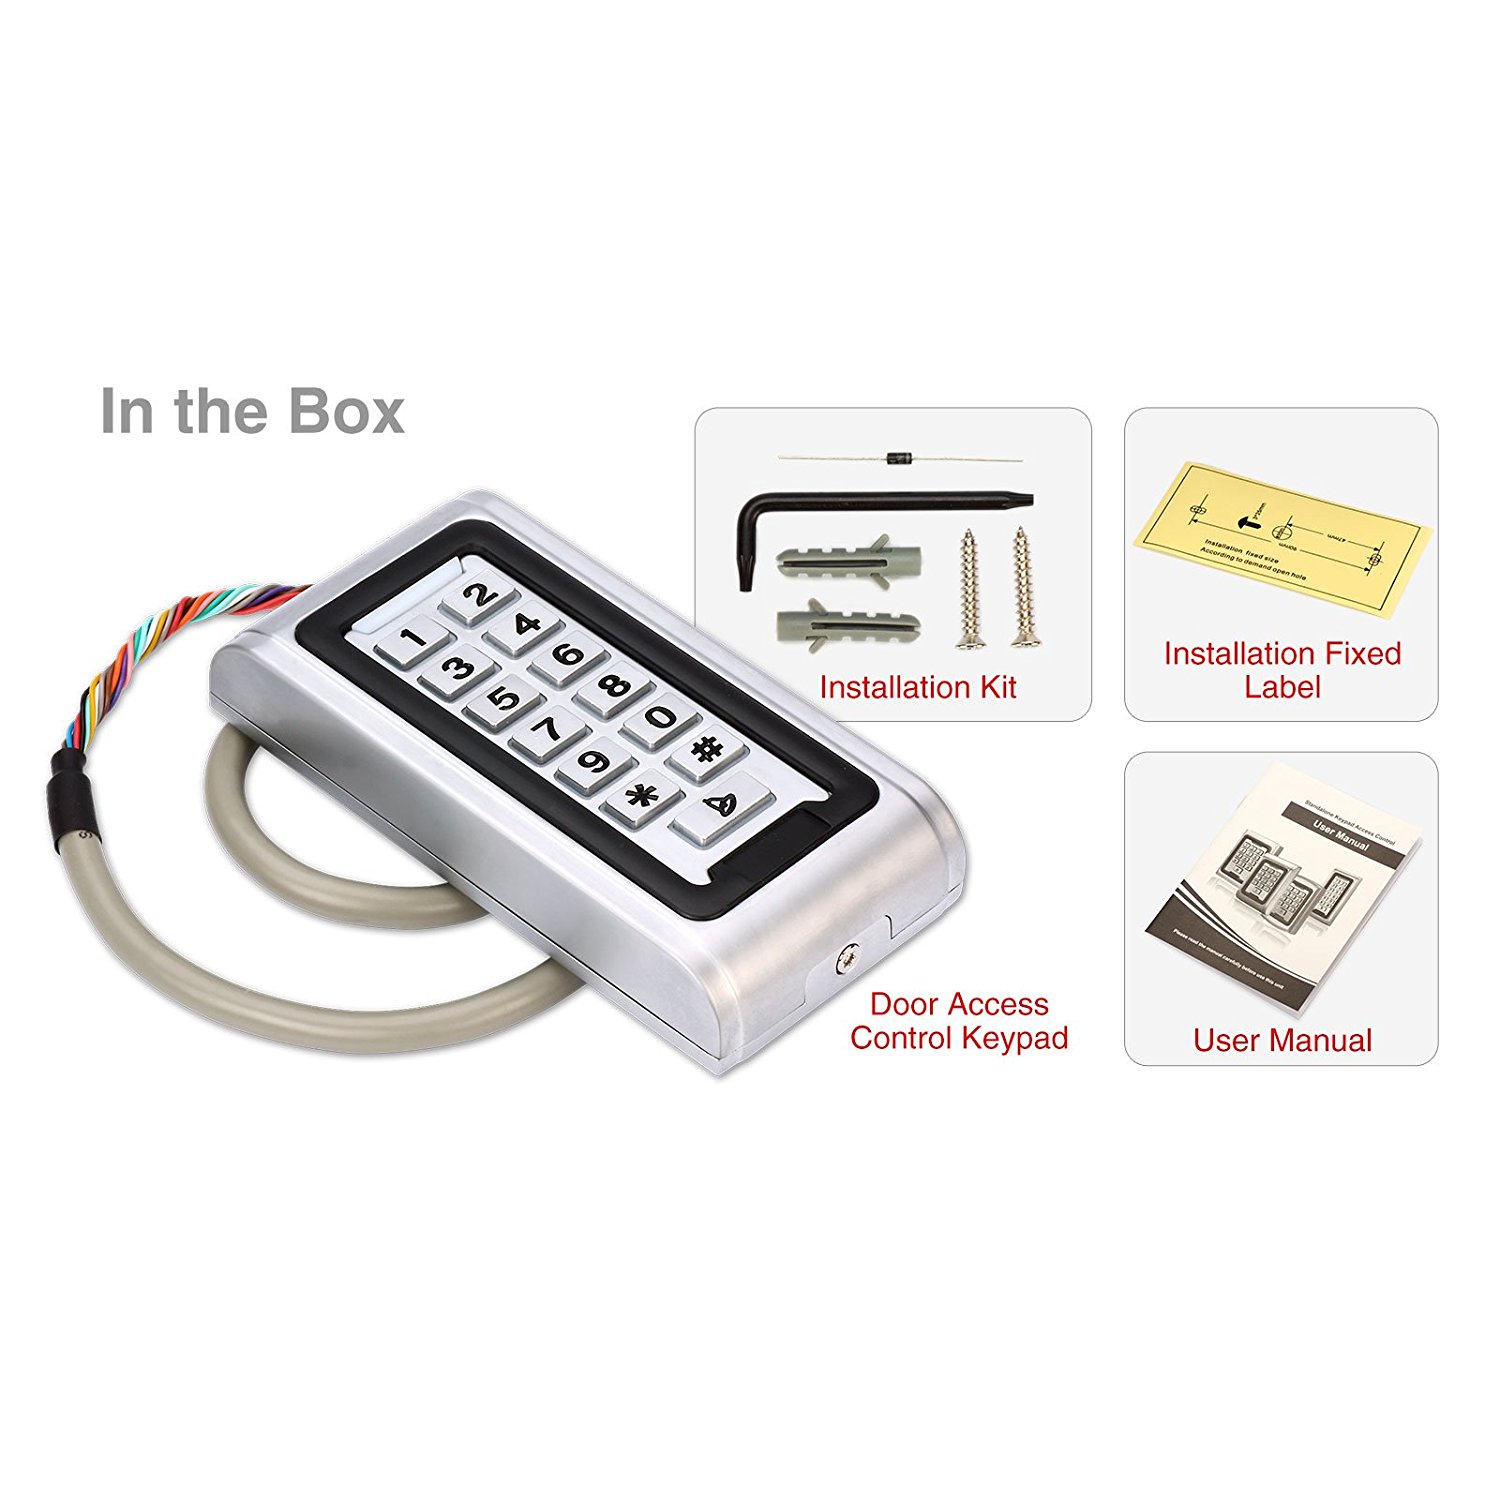 Waterproof Metal Case Swipe RFID Card Reader Keypads Access Control Systems For Outdoor